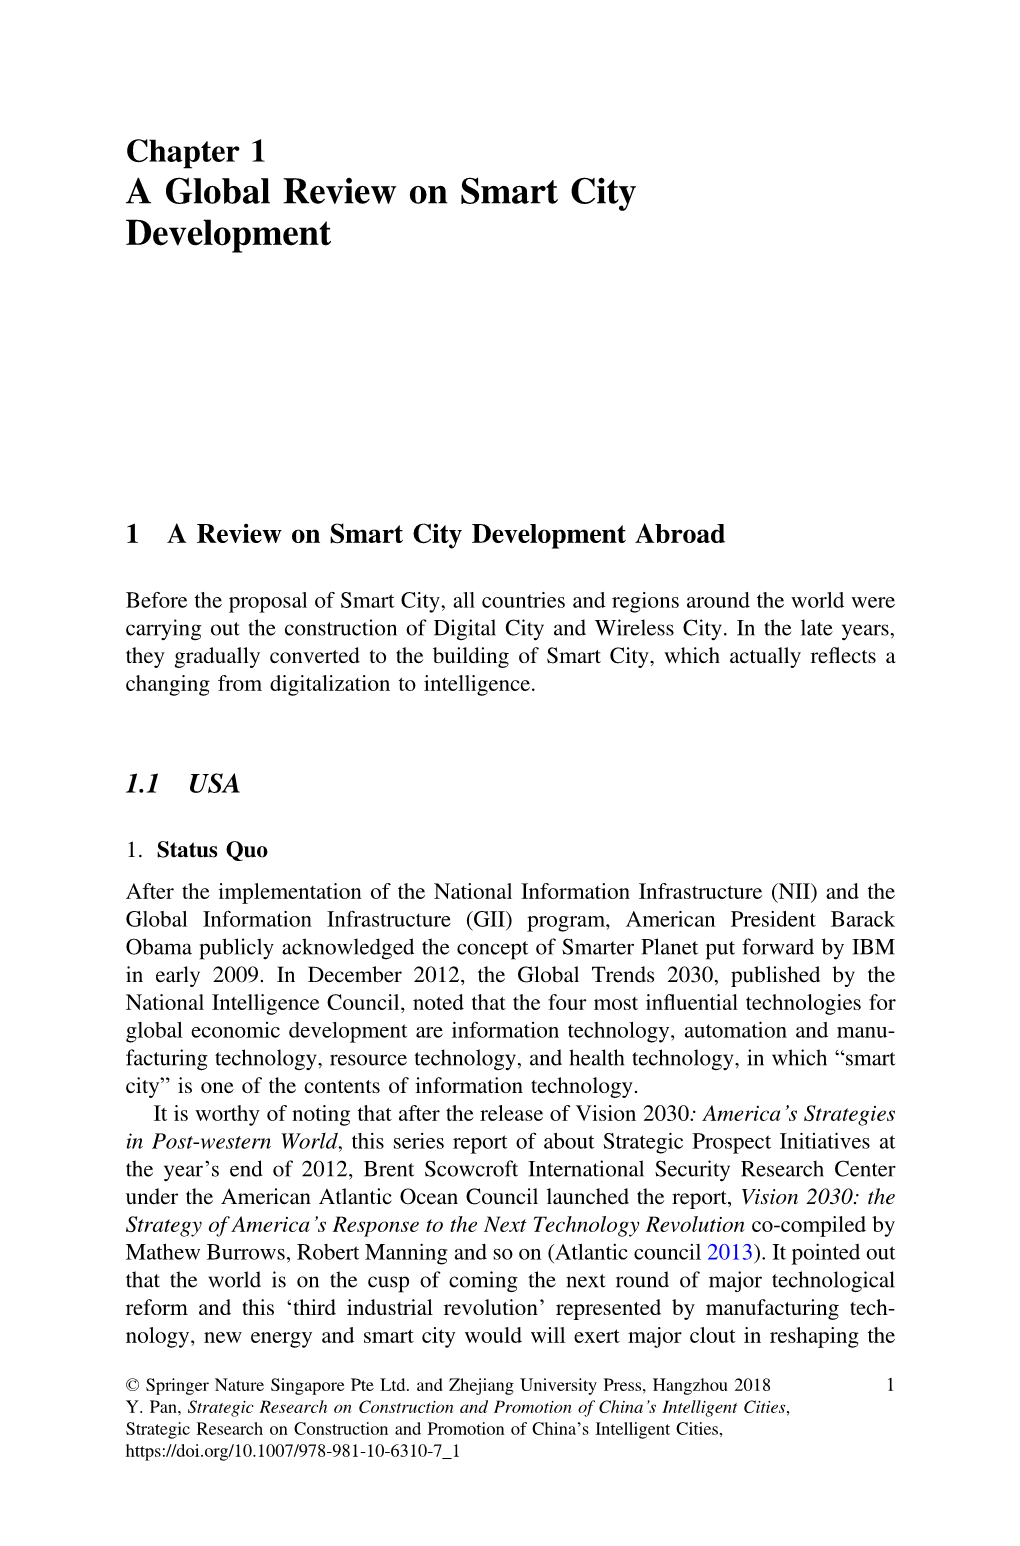 A Global Review on Smart City Development